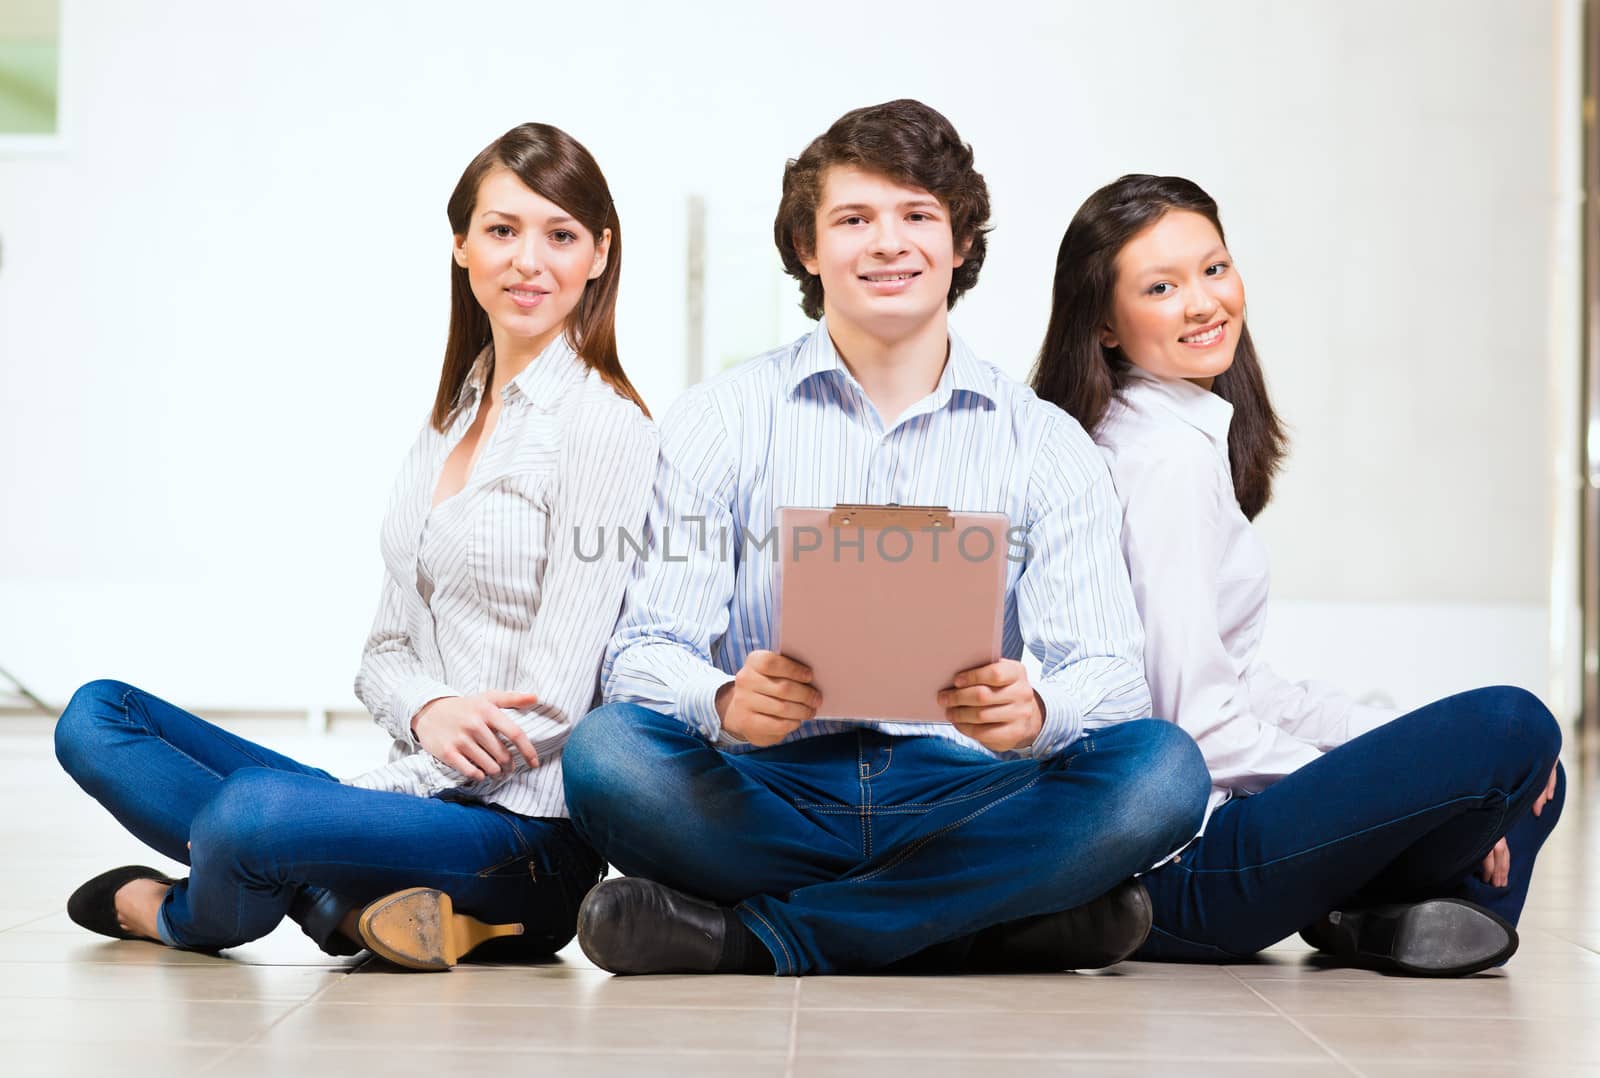 portrait of a group of young people sitting on the floor, man and two attractive women